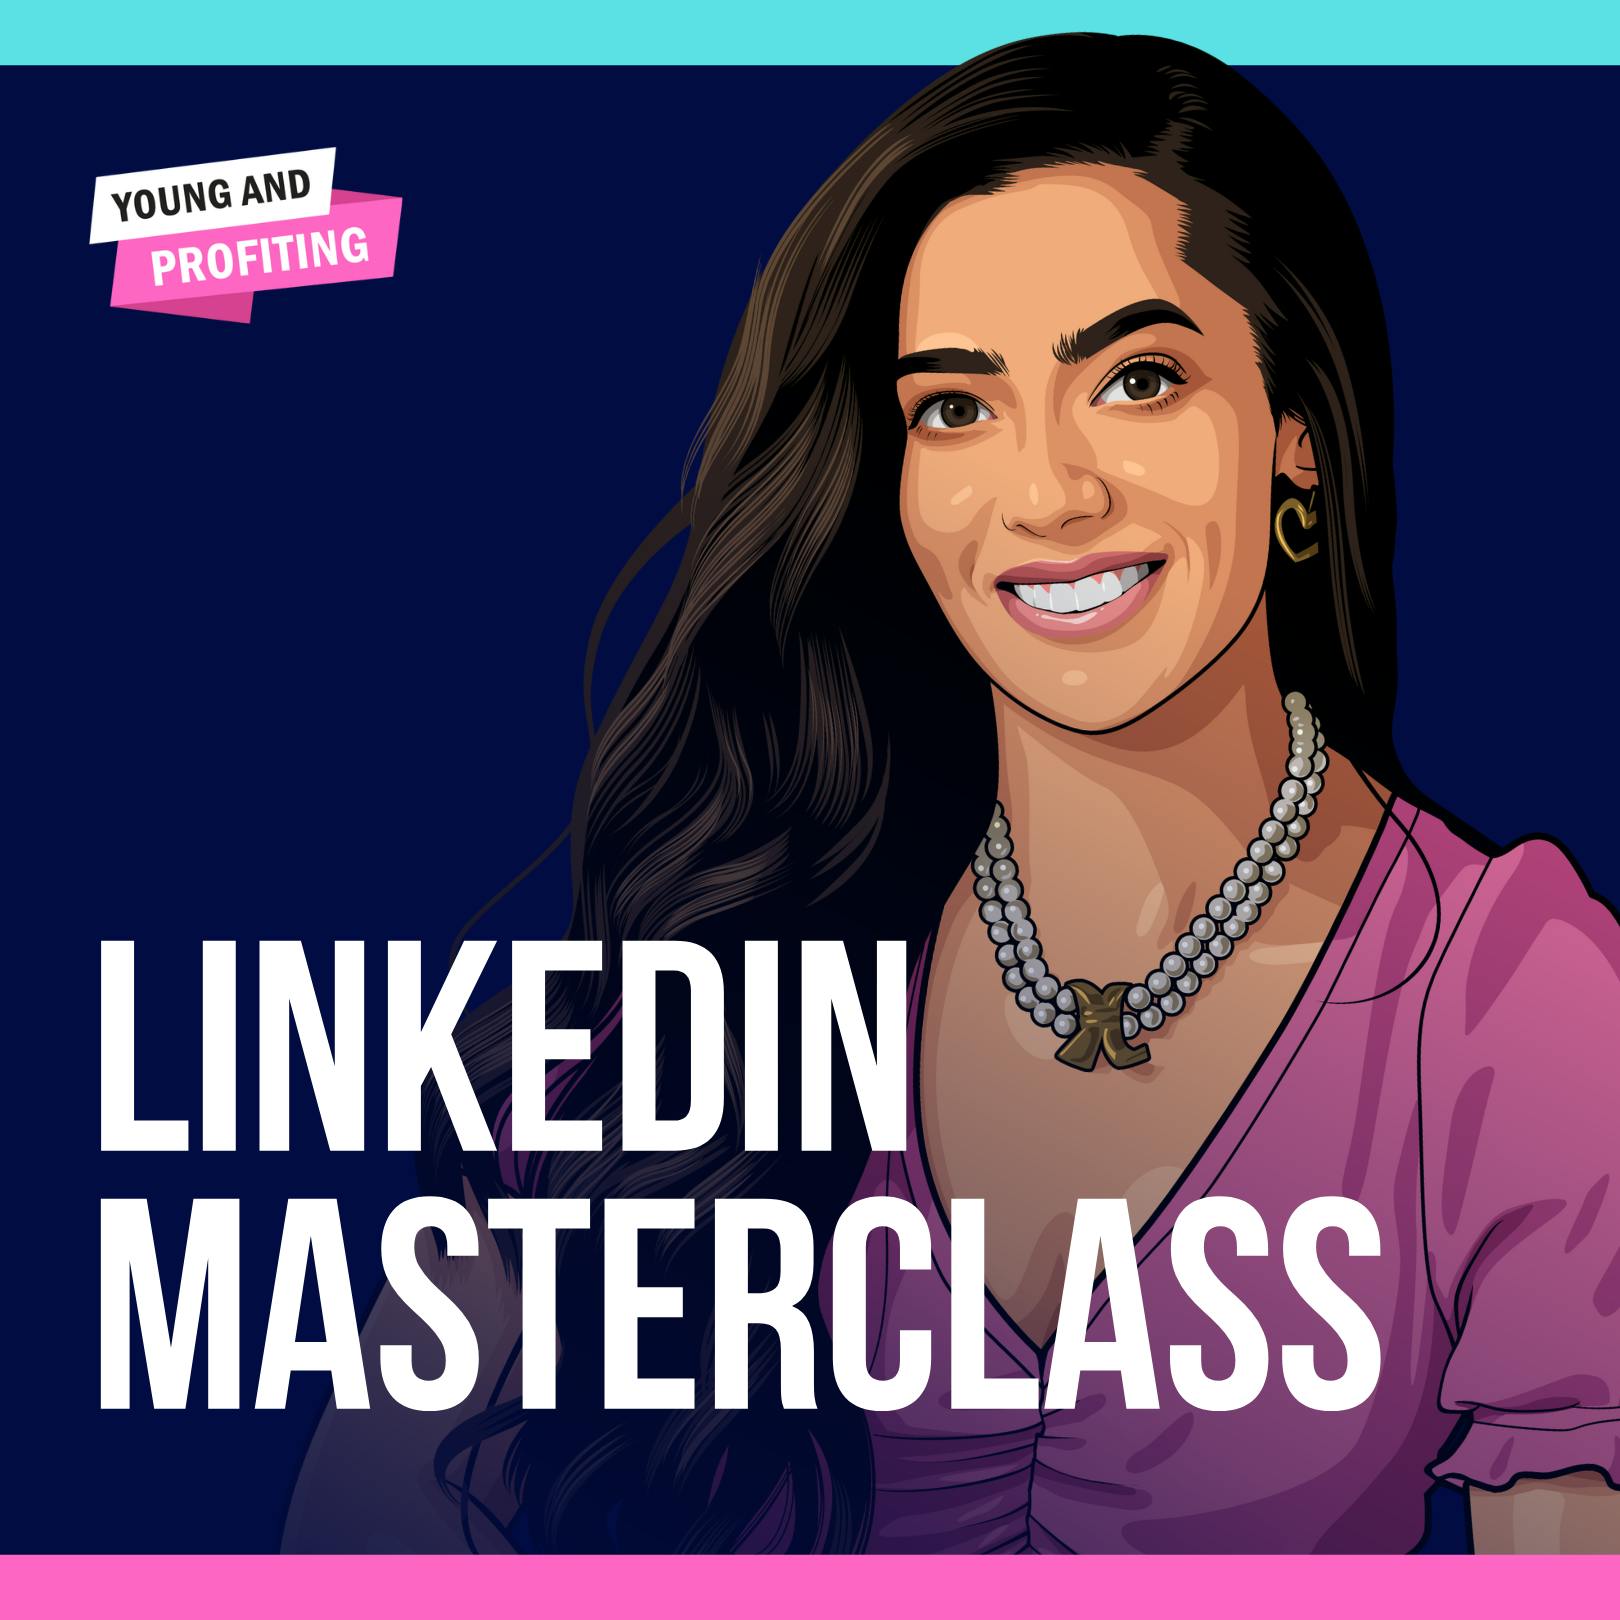 LinkedIn Masterclass: The LinkedIn Secrets That Scaled My Business from 0 to $5M+  by Hala Taha | YAP Media Network